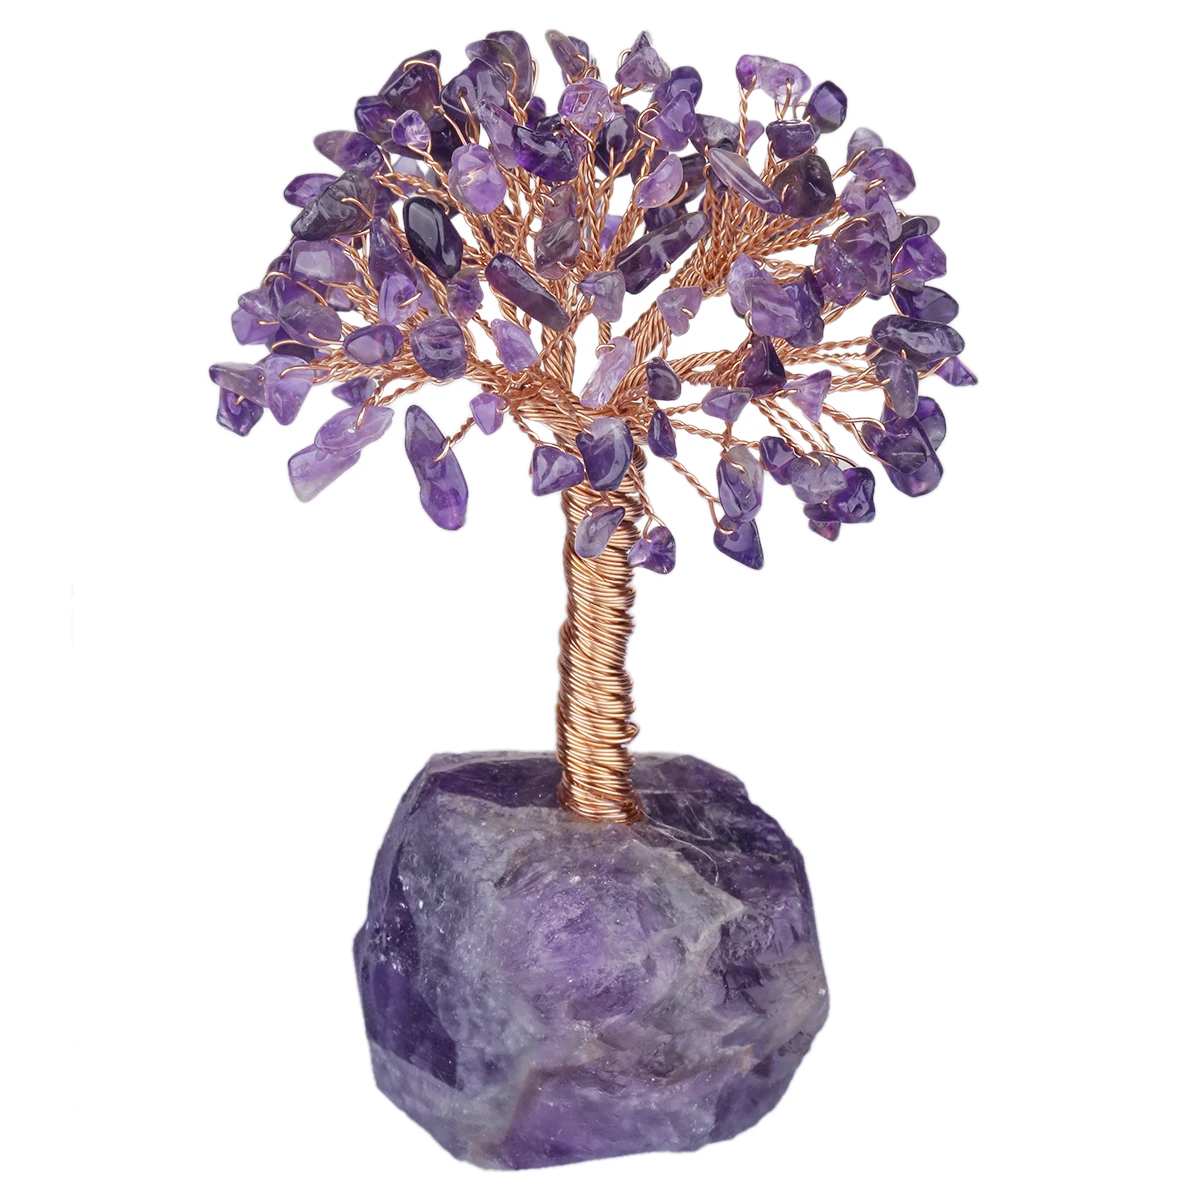 Natural Amethyst Crystal Tree With Rough Stone Base Healing Gemstone Chips Bonsai Money Tree Decoration For Wealth and Luck